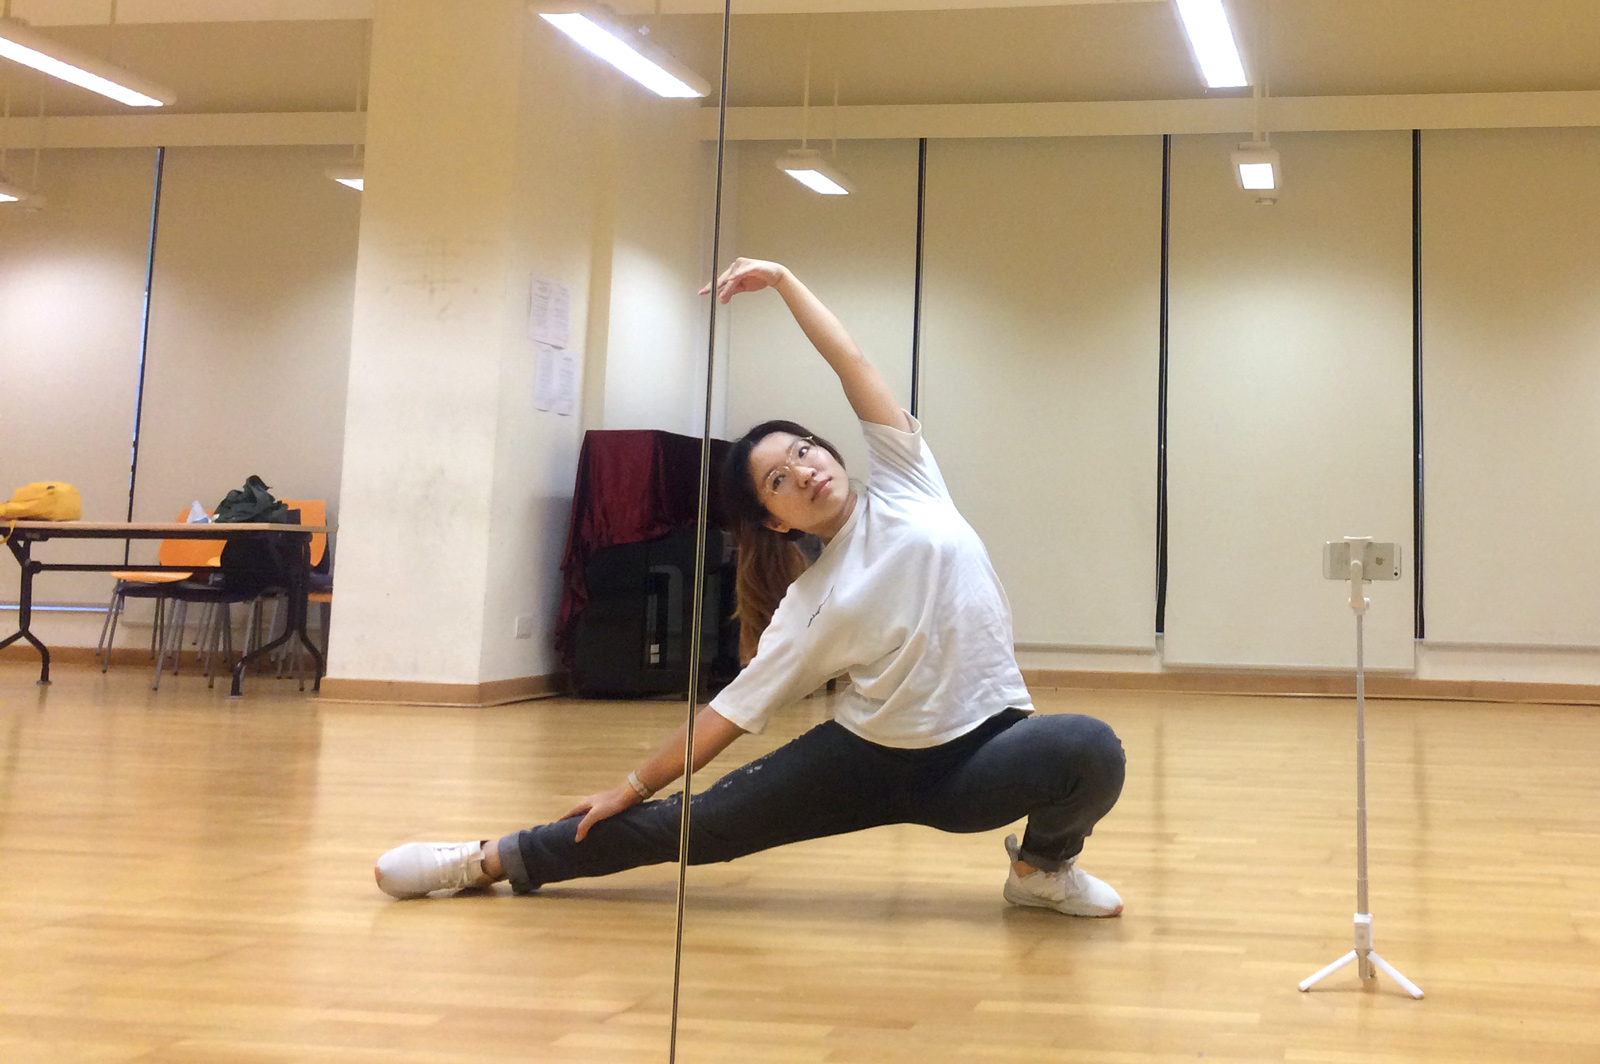 As well as her academic studies, Huang Ruini still practices dance in her spare time.